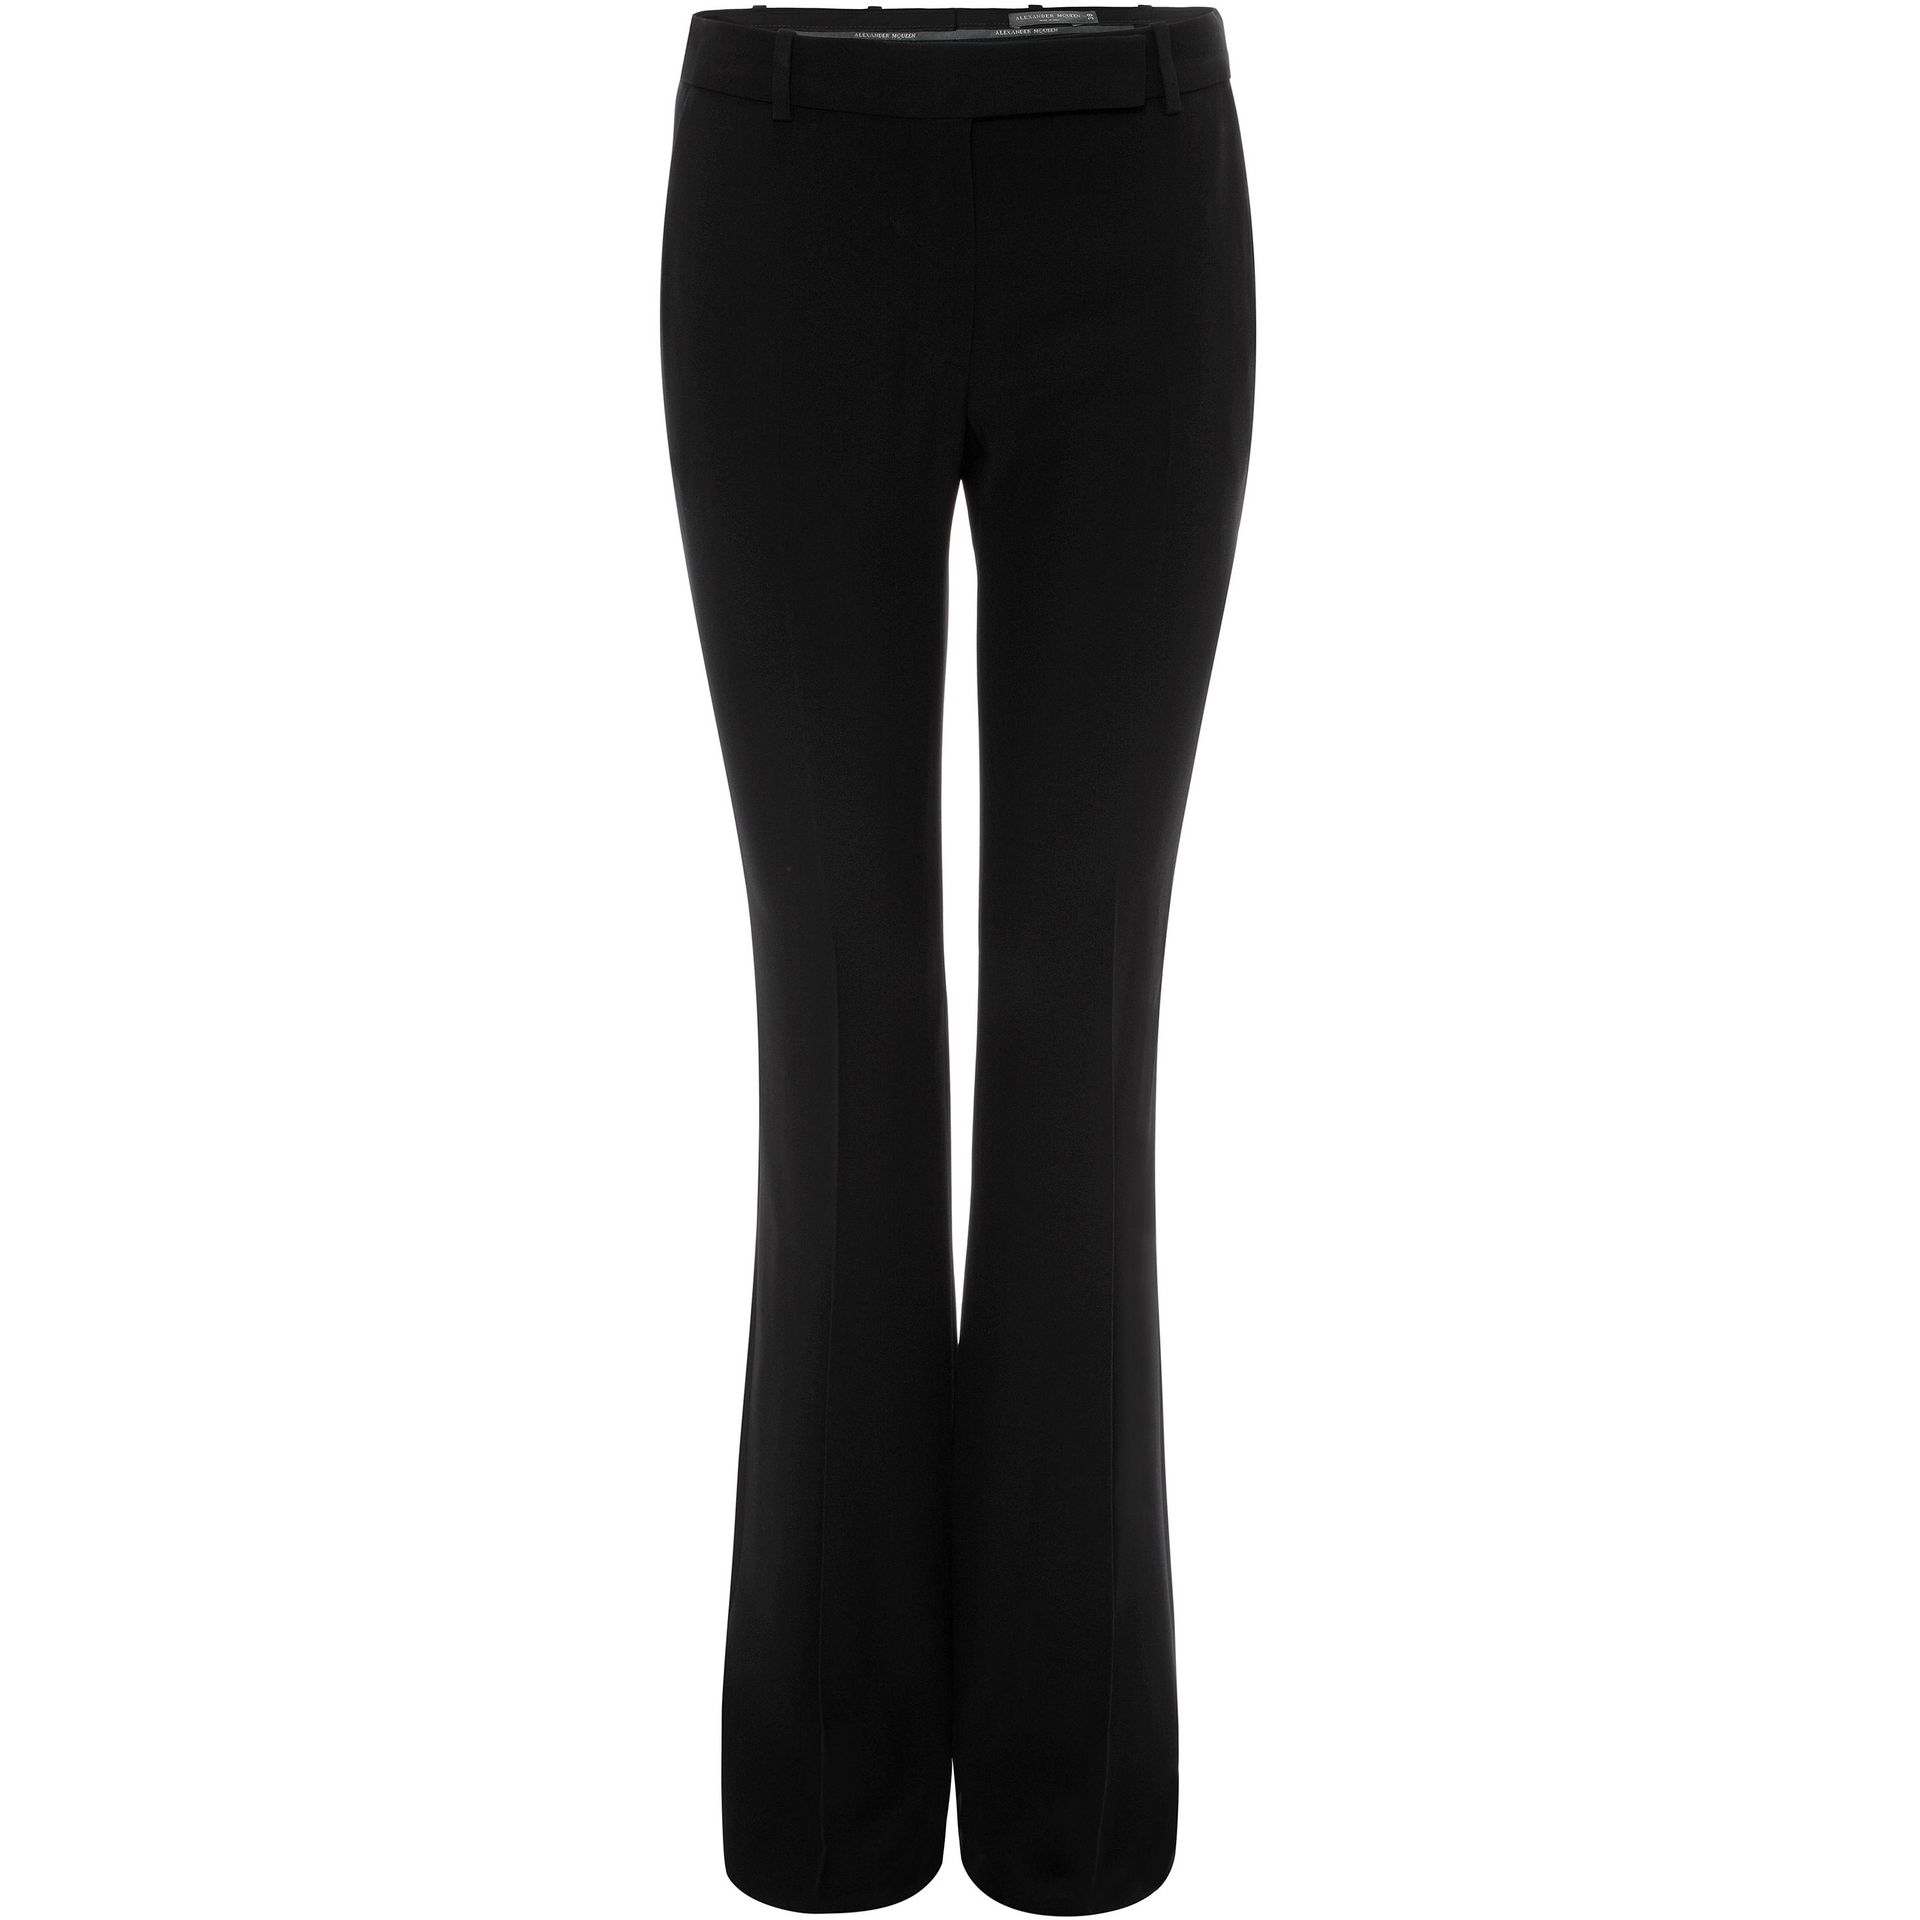 Narrow Bootcut Trousers Alexander McQueen | Pants | Trousers Skirts